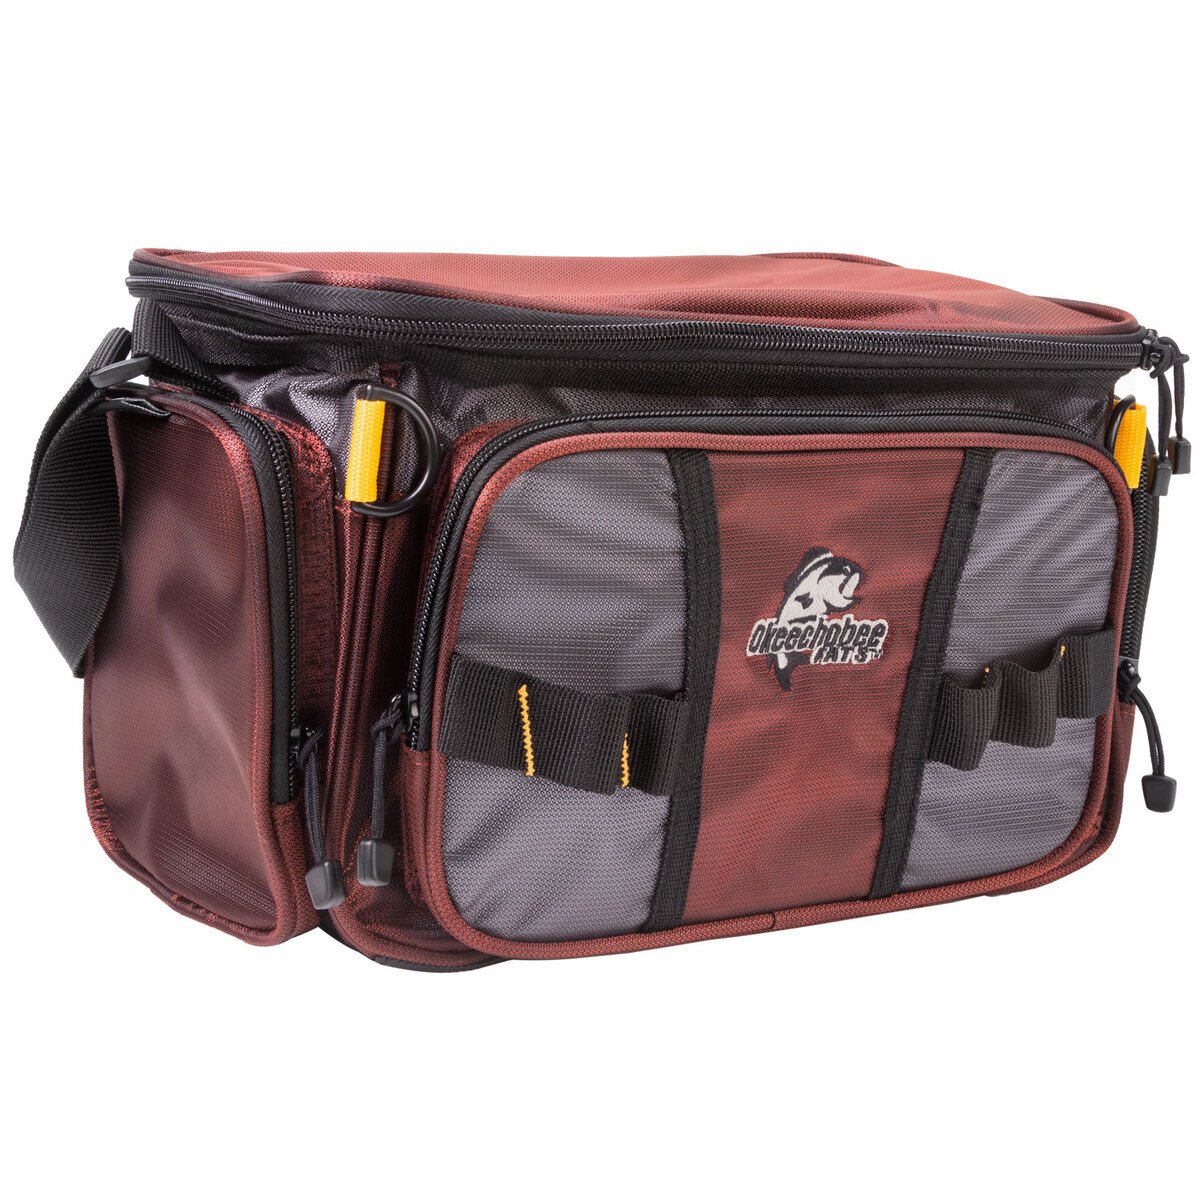 360 Fishing Gear Tackle Bag by Okeechobee Fats | Soft Sided Fishing Bag |  Includes 3 Fishing Accessories Utility Boxes | Top Loading Fishing Tackle